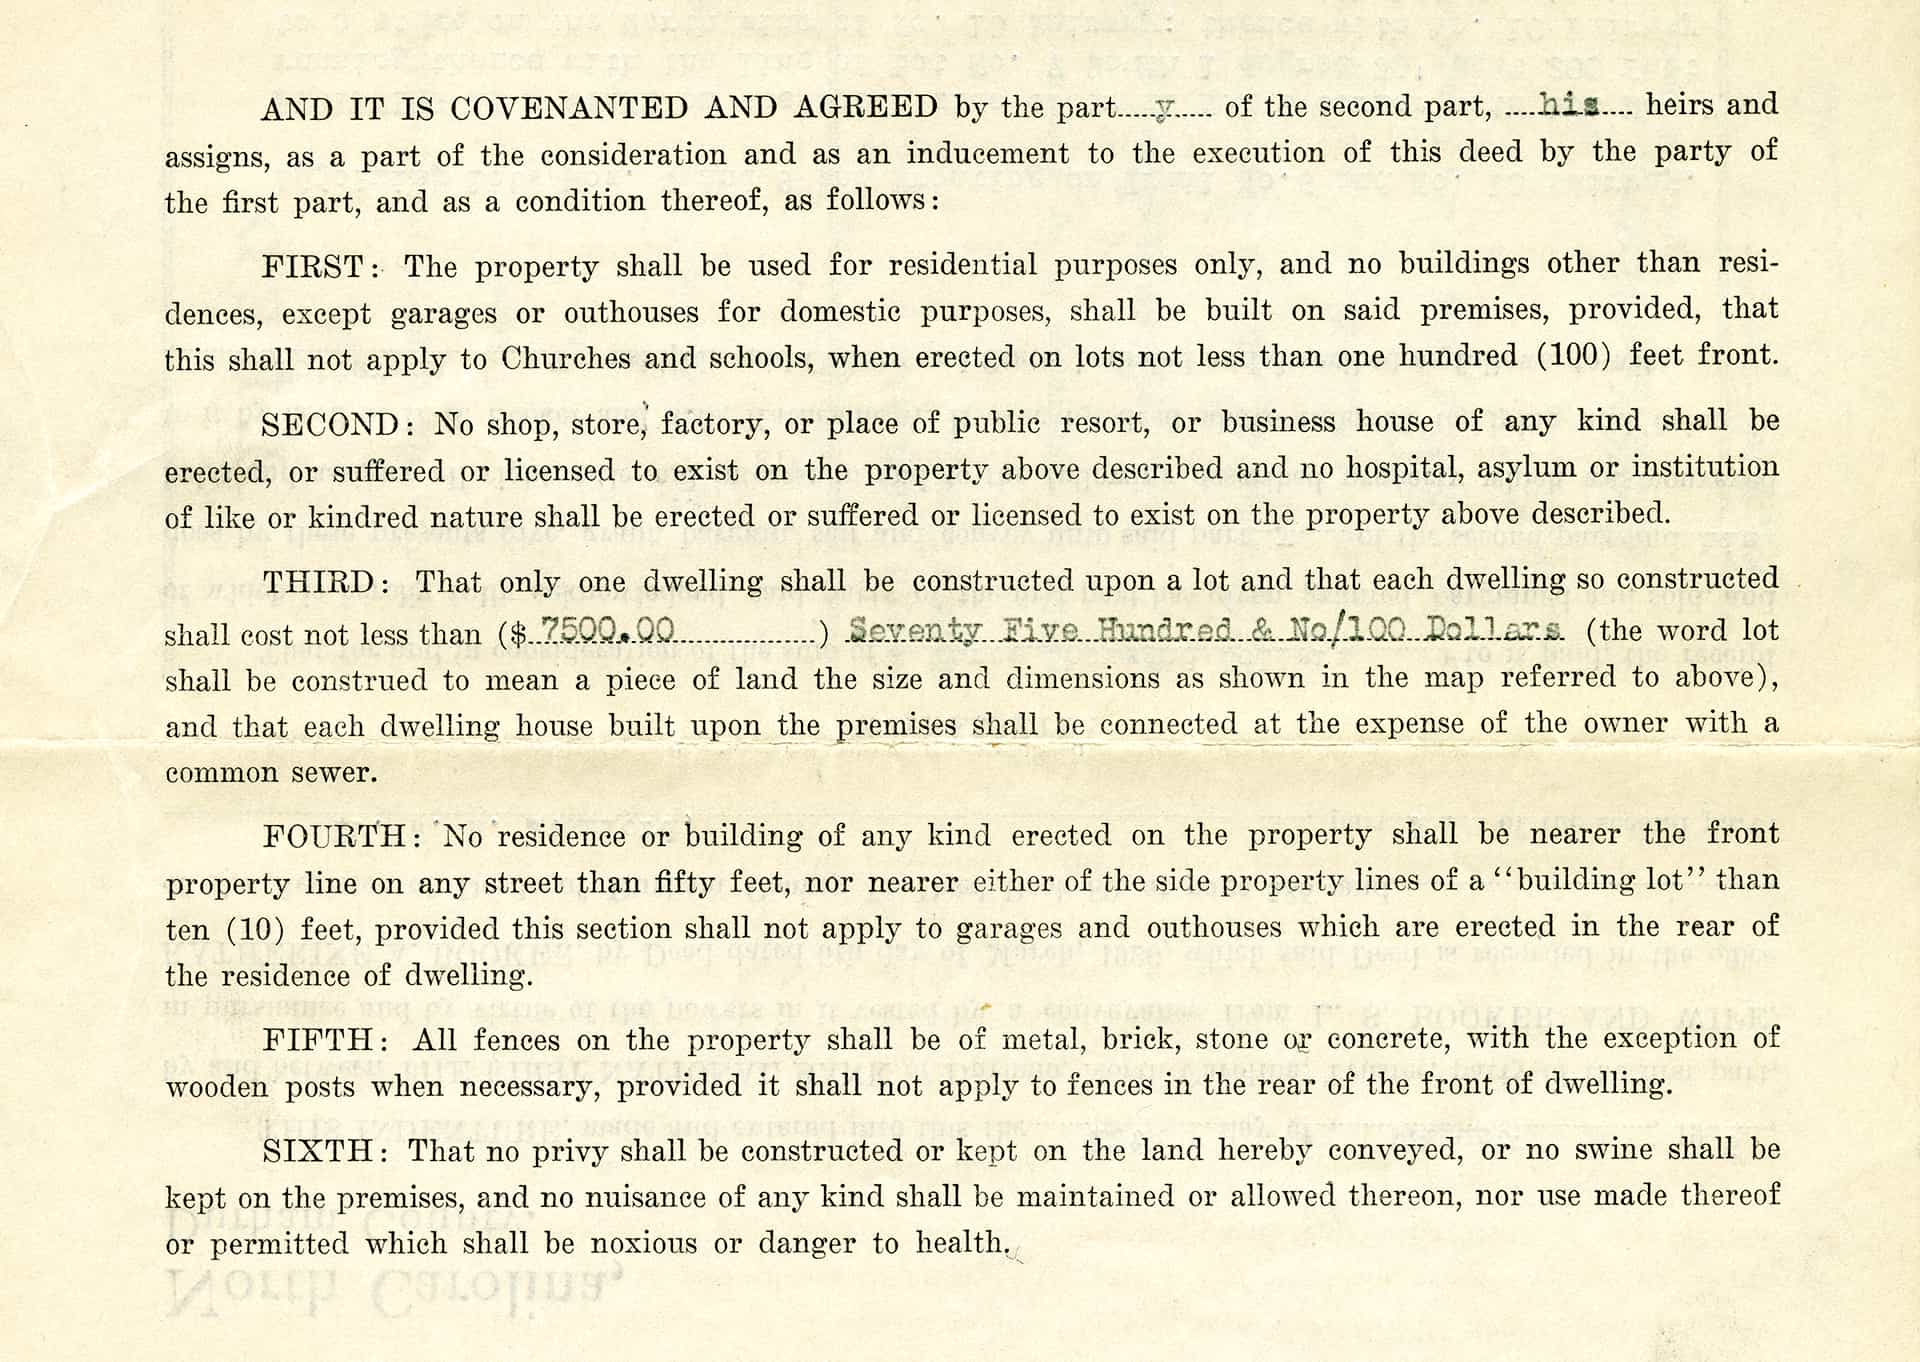 Excerpt of Racial Covenant from the Hope Valley deed restrictions, 1926. Courtesy North Carolina Collection, Durham County Libraries.